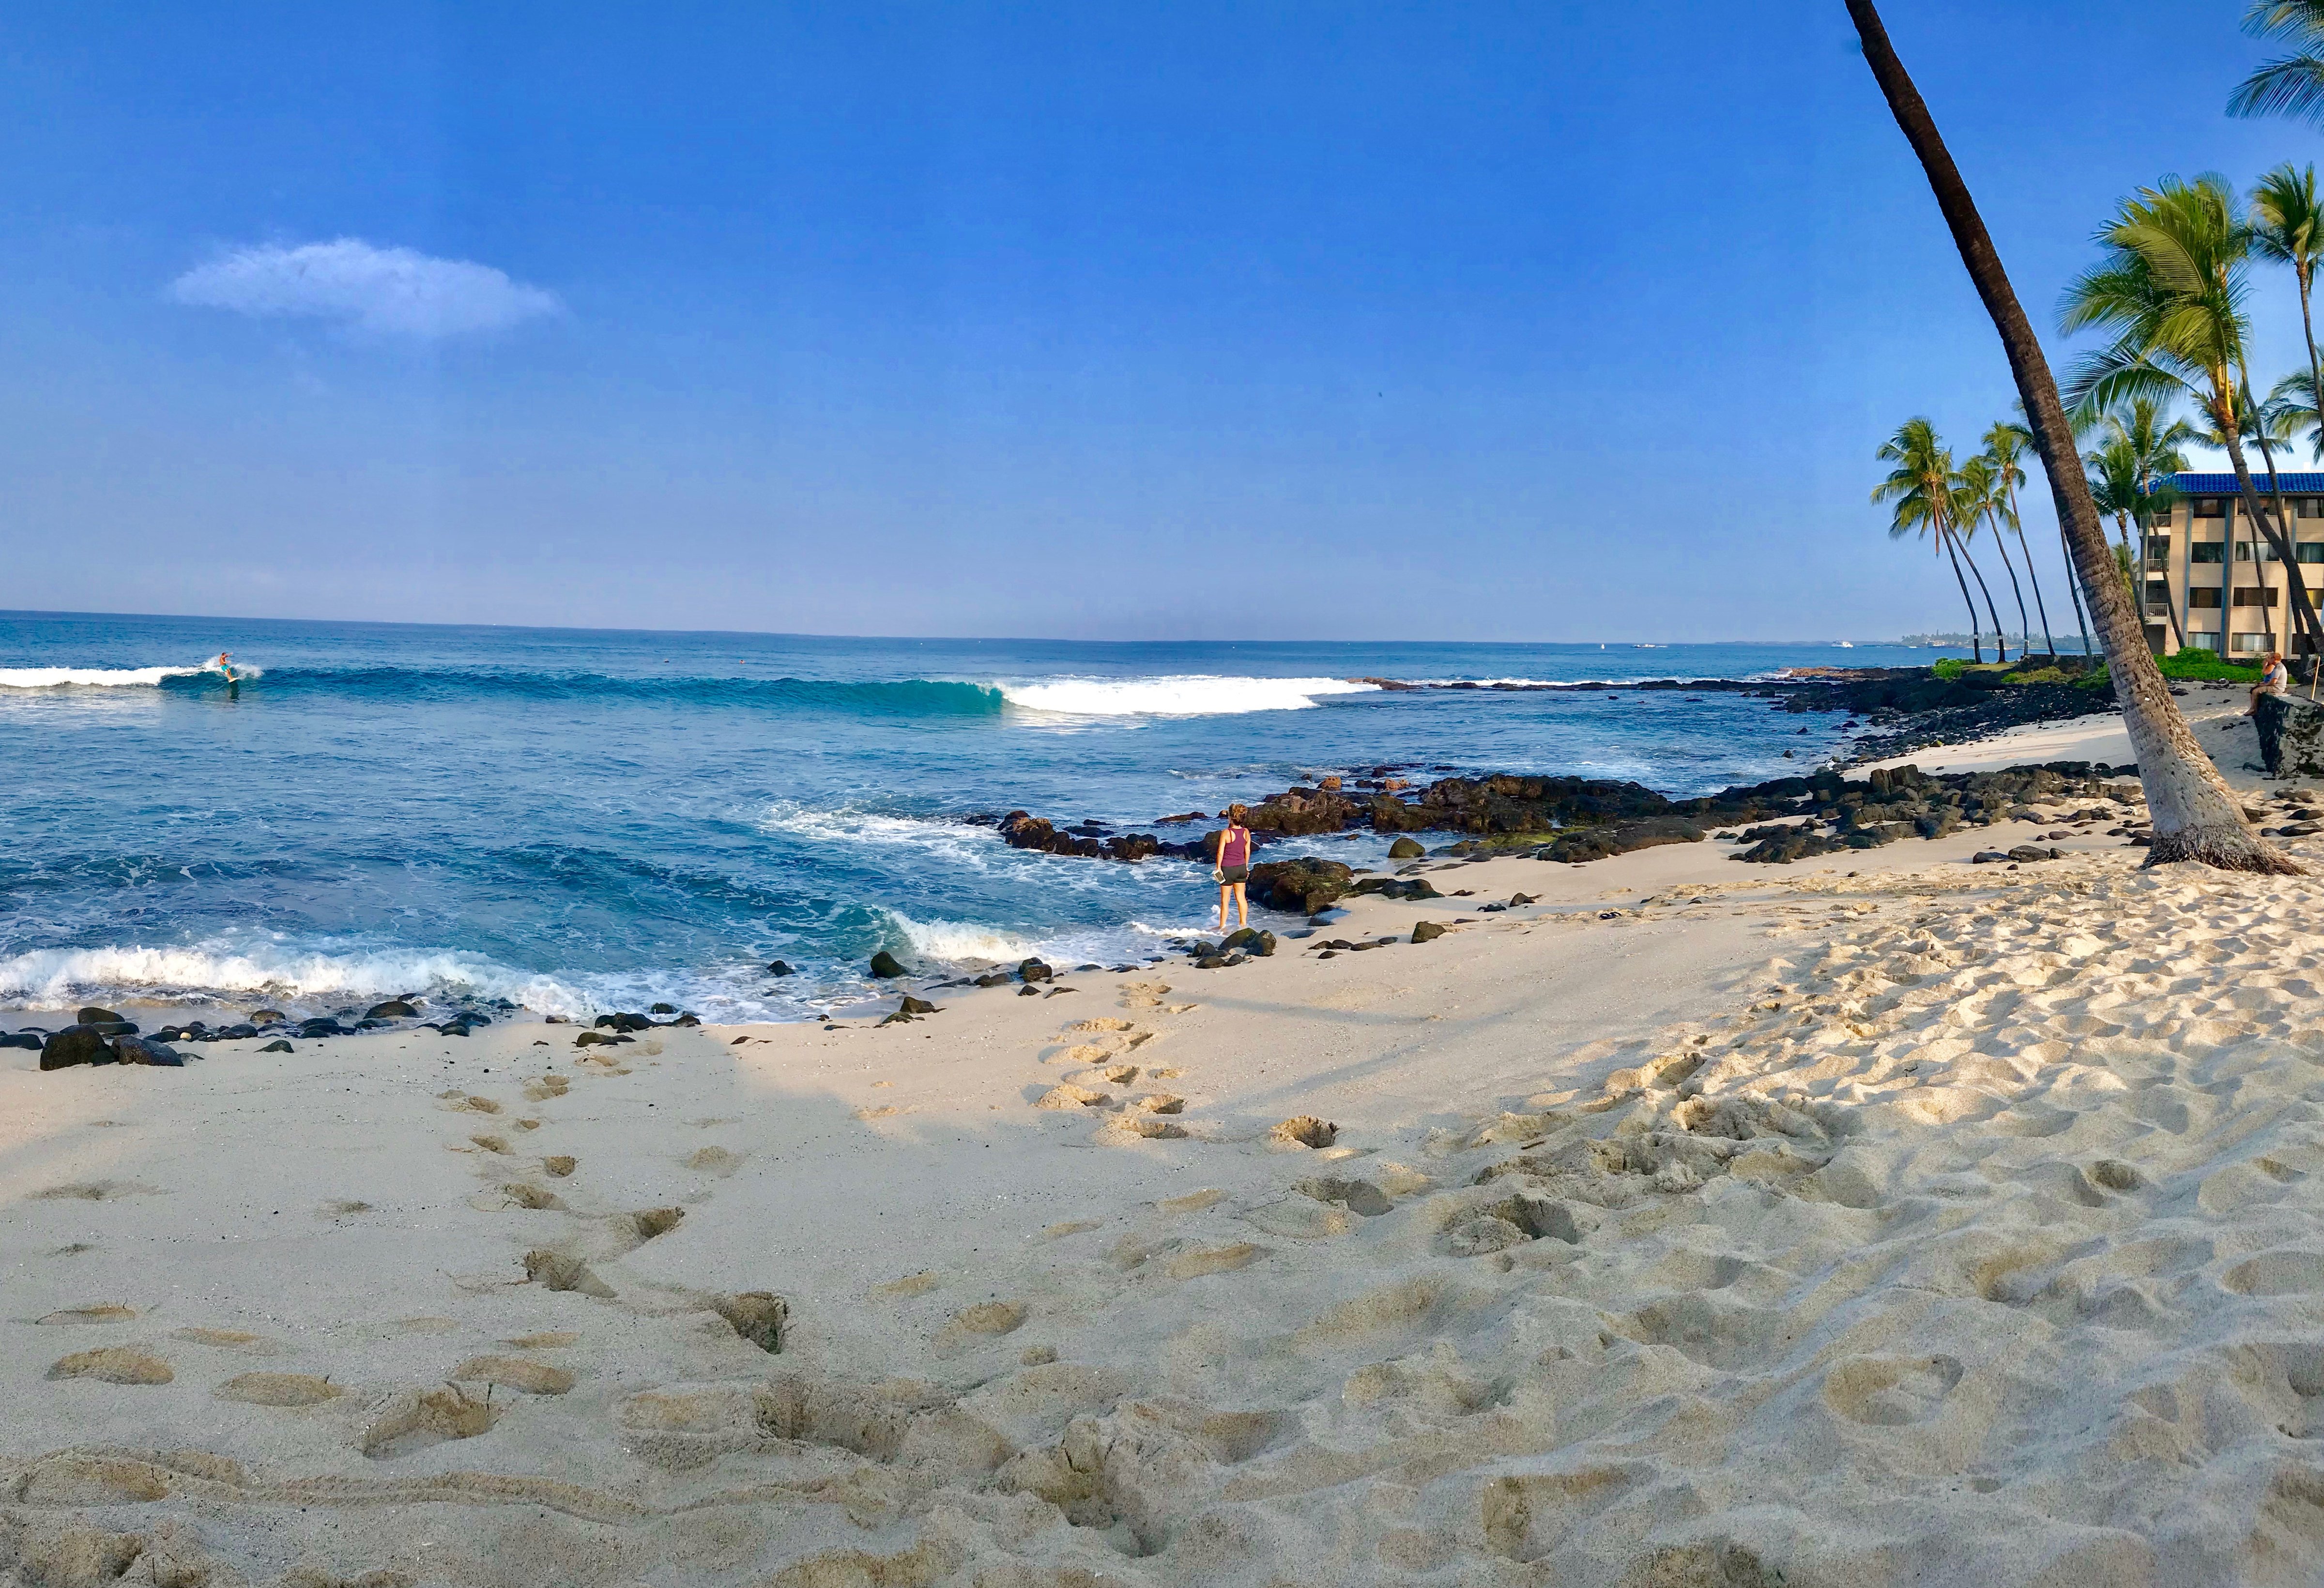 The beach at Kailua-Kona remains empty, awaiting the return of the Norwegian Cruise Line, Pride of America. (Maggie Brown, Owner of Body Glove Cruises)